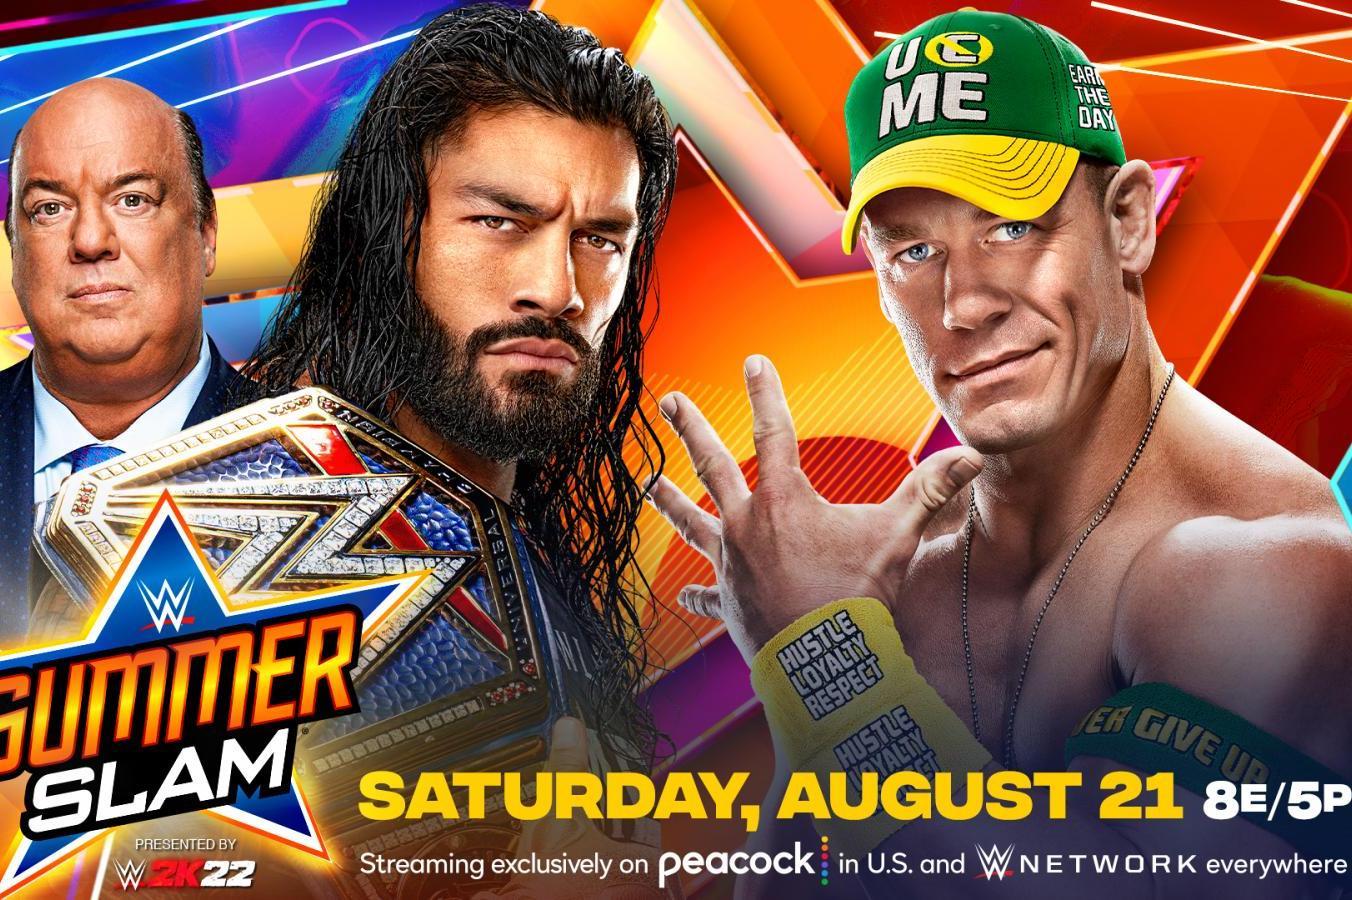 John Cena Vs Roman Reigns And Matches With The Most Star Power In Wwe History Bleacher Report Latest News Videos And Highlights